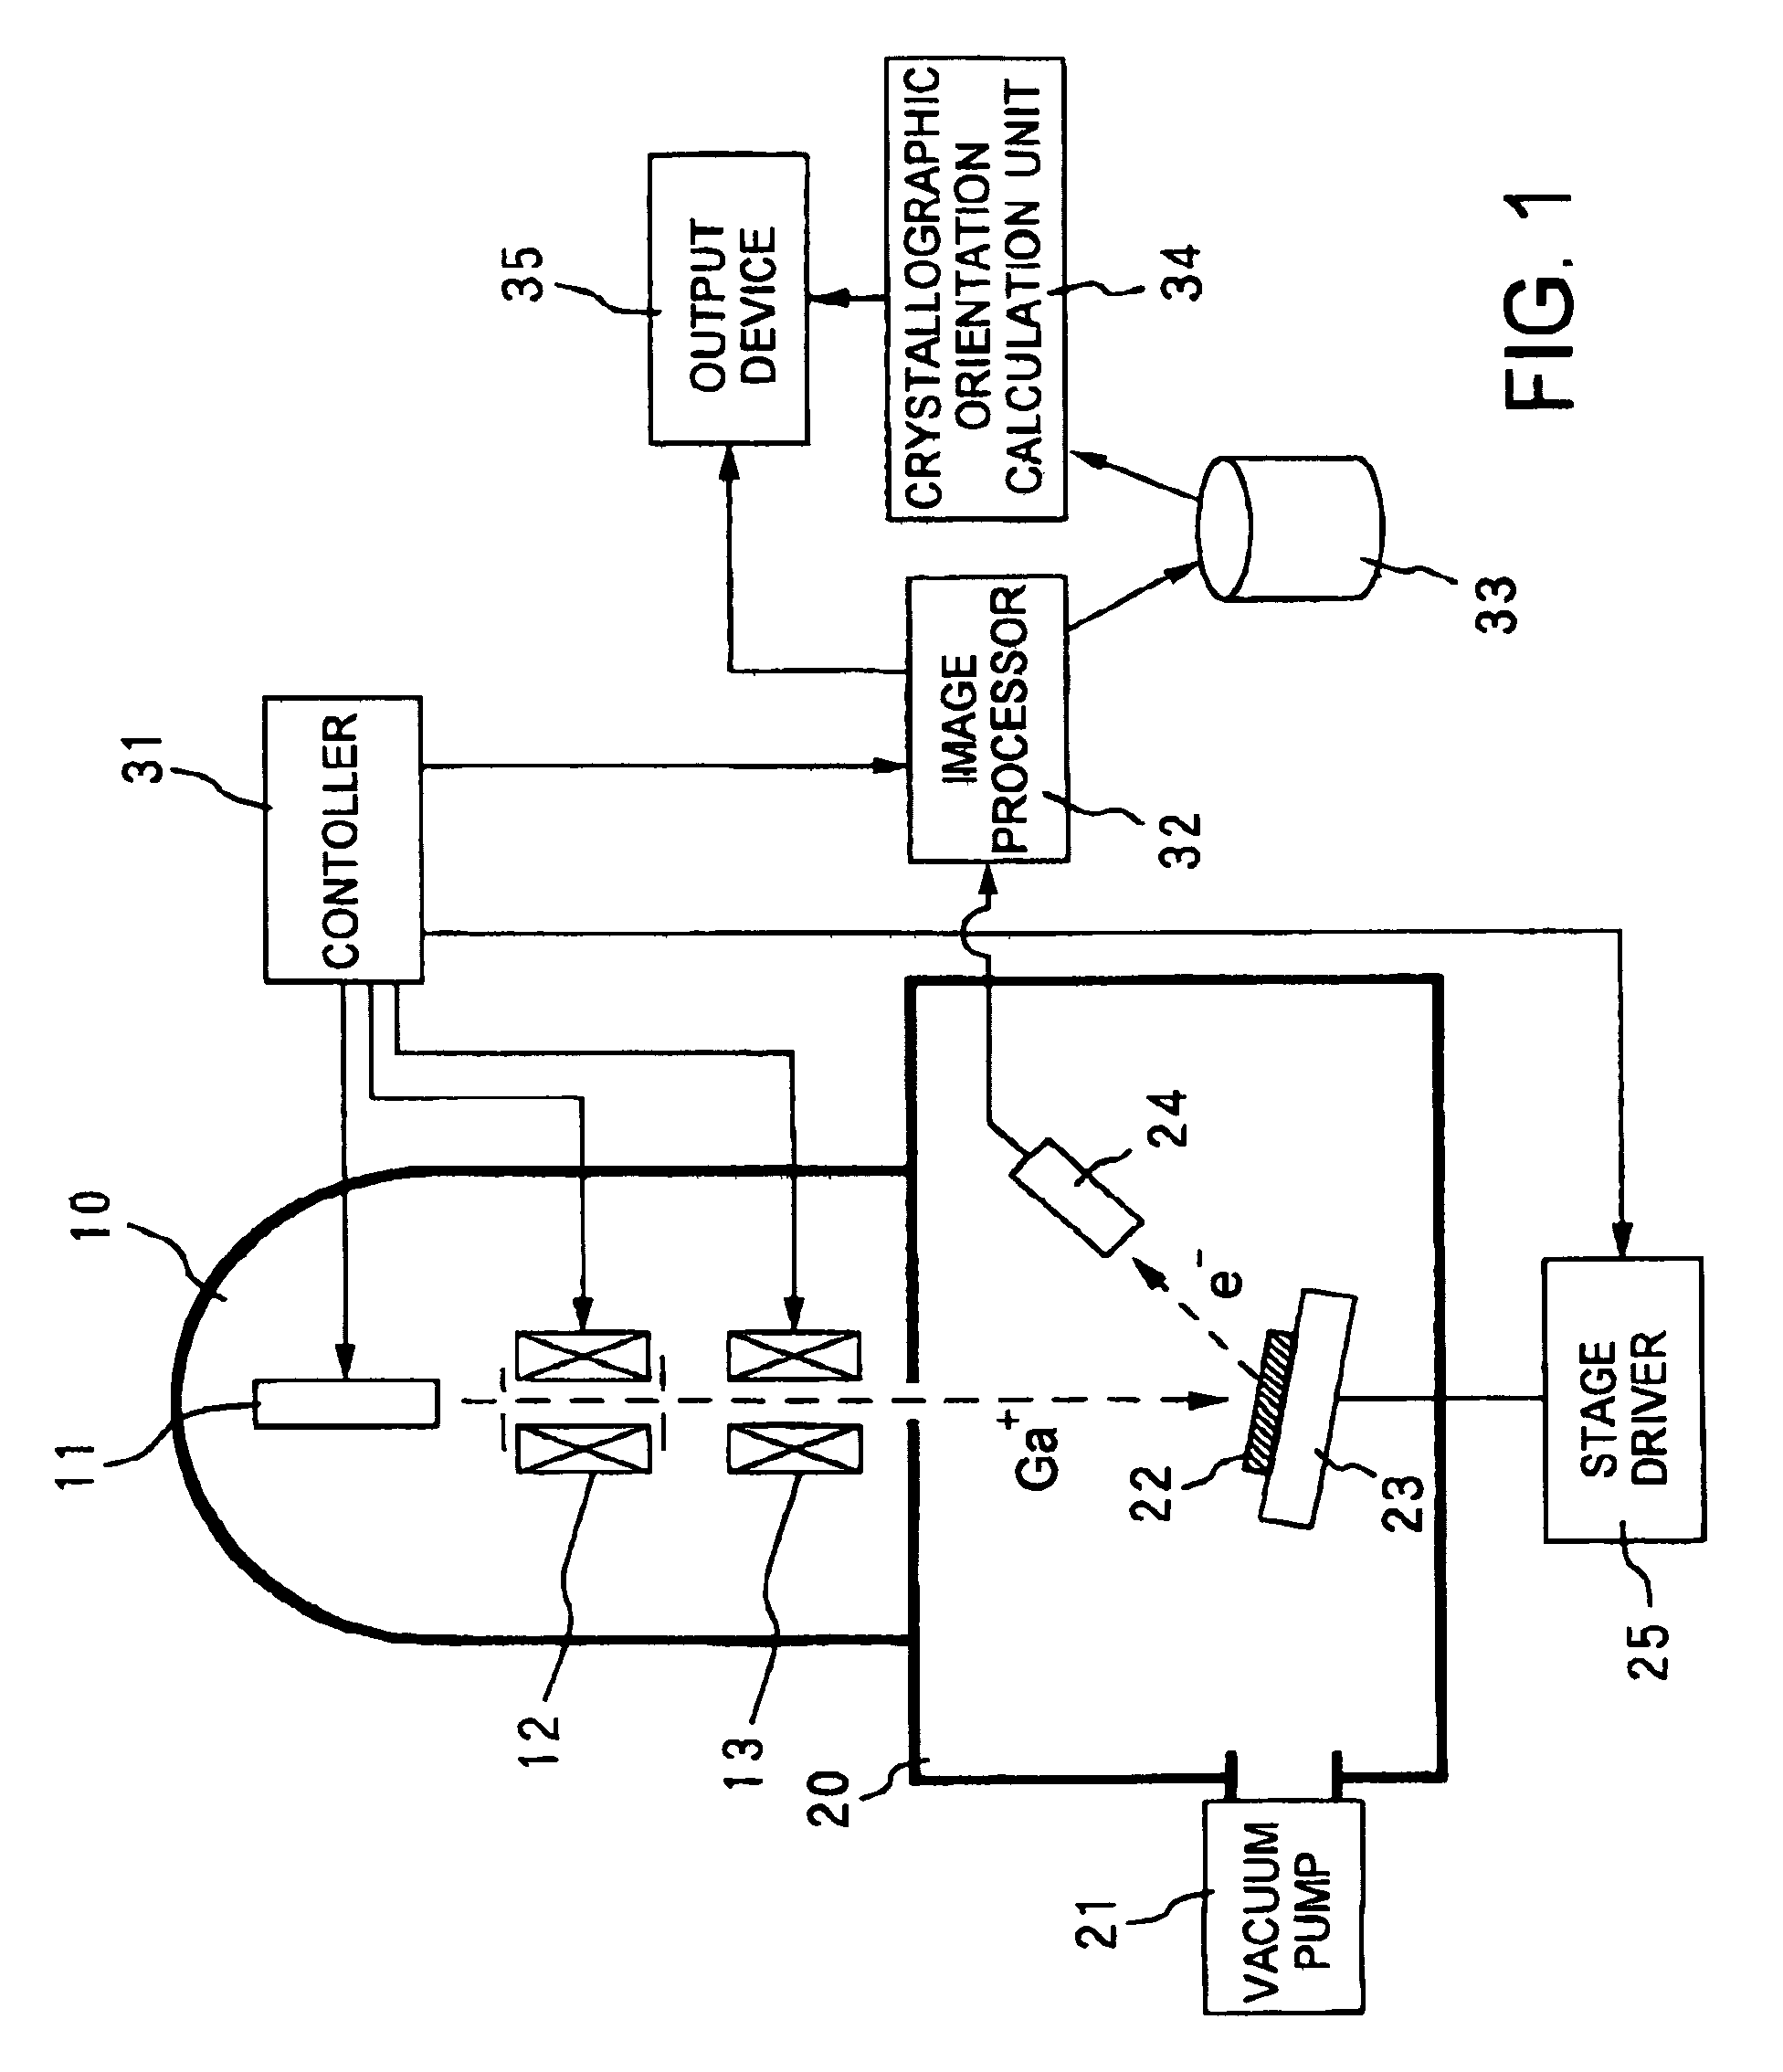 Method and apparatus for crystal analysis